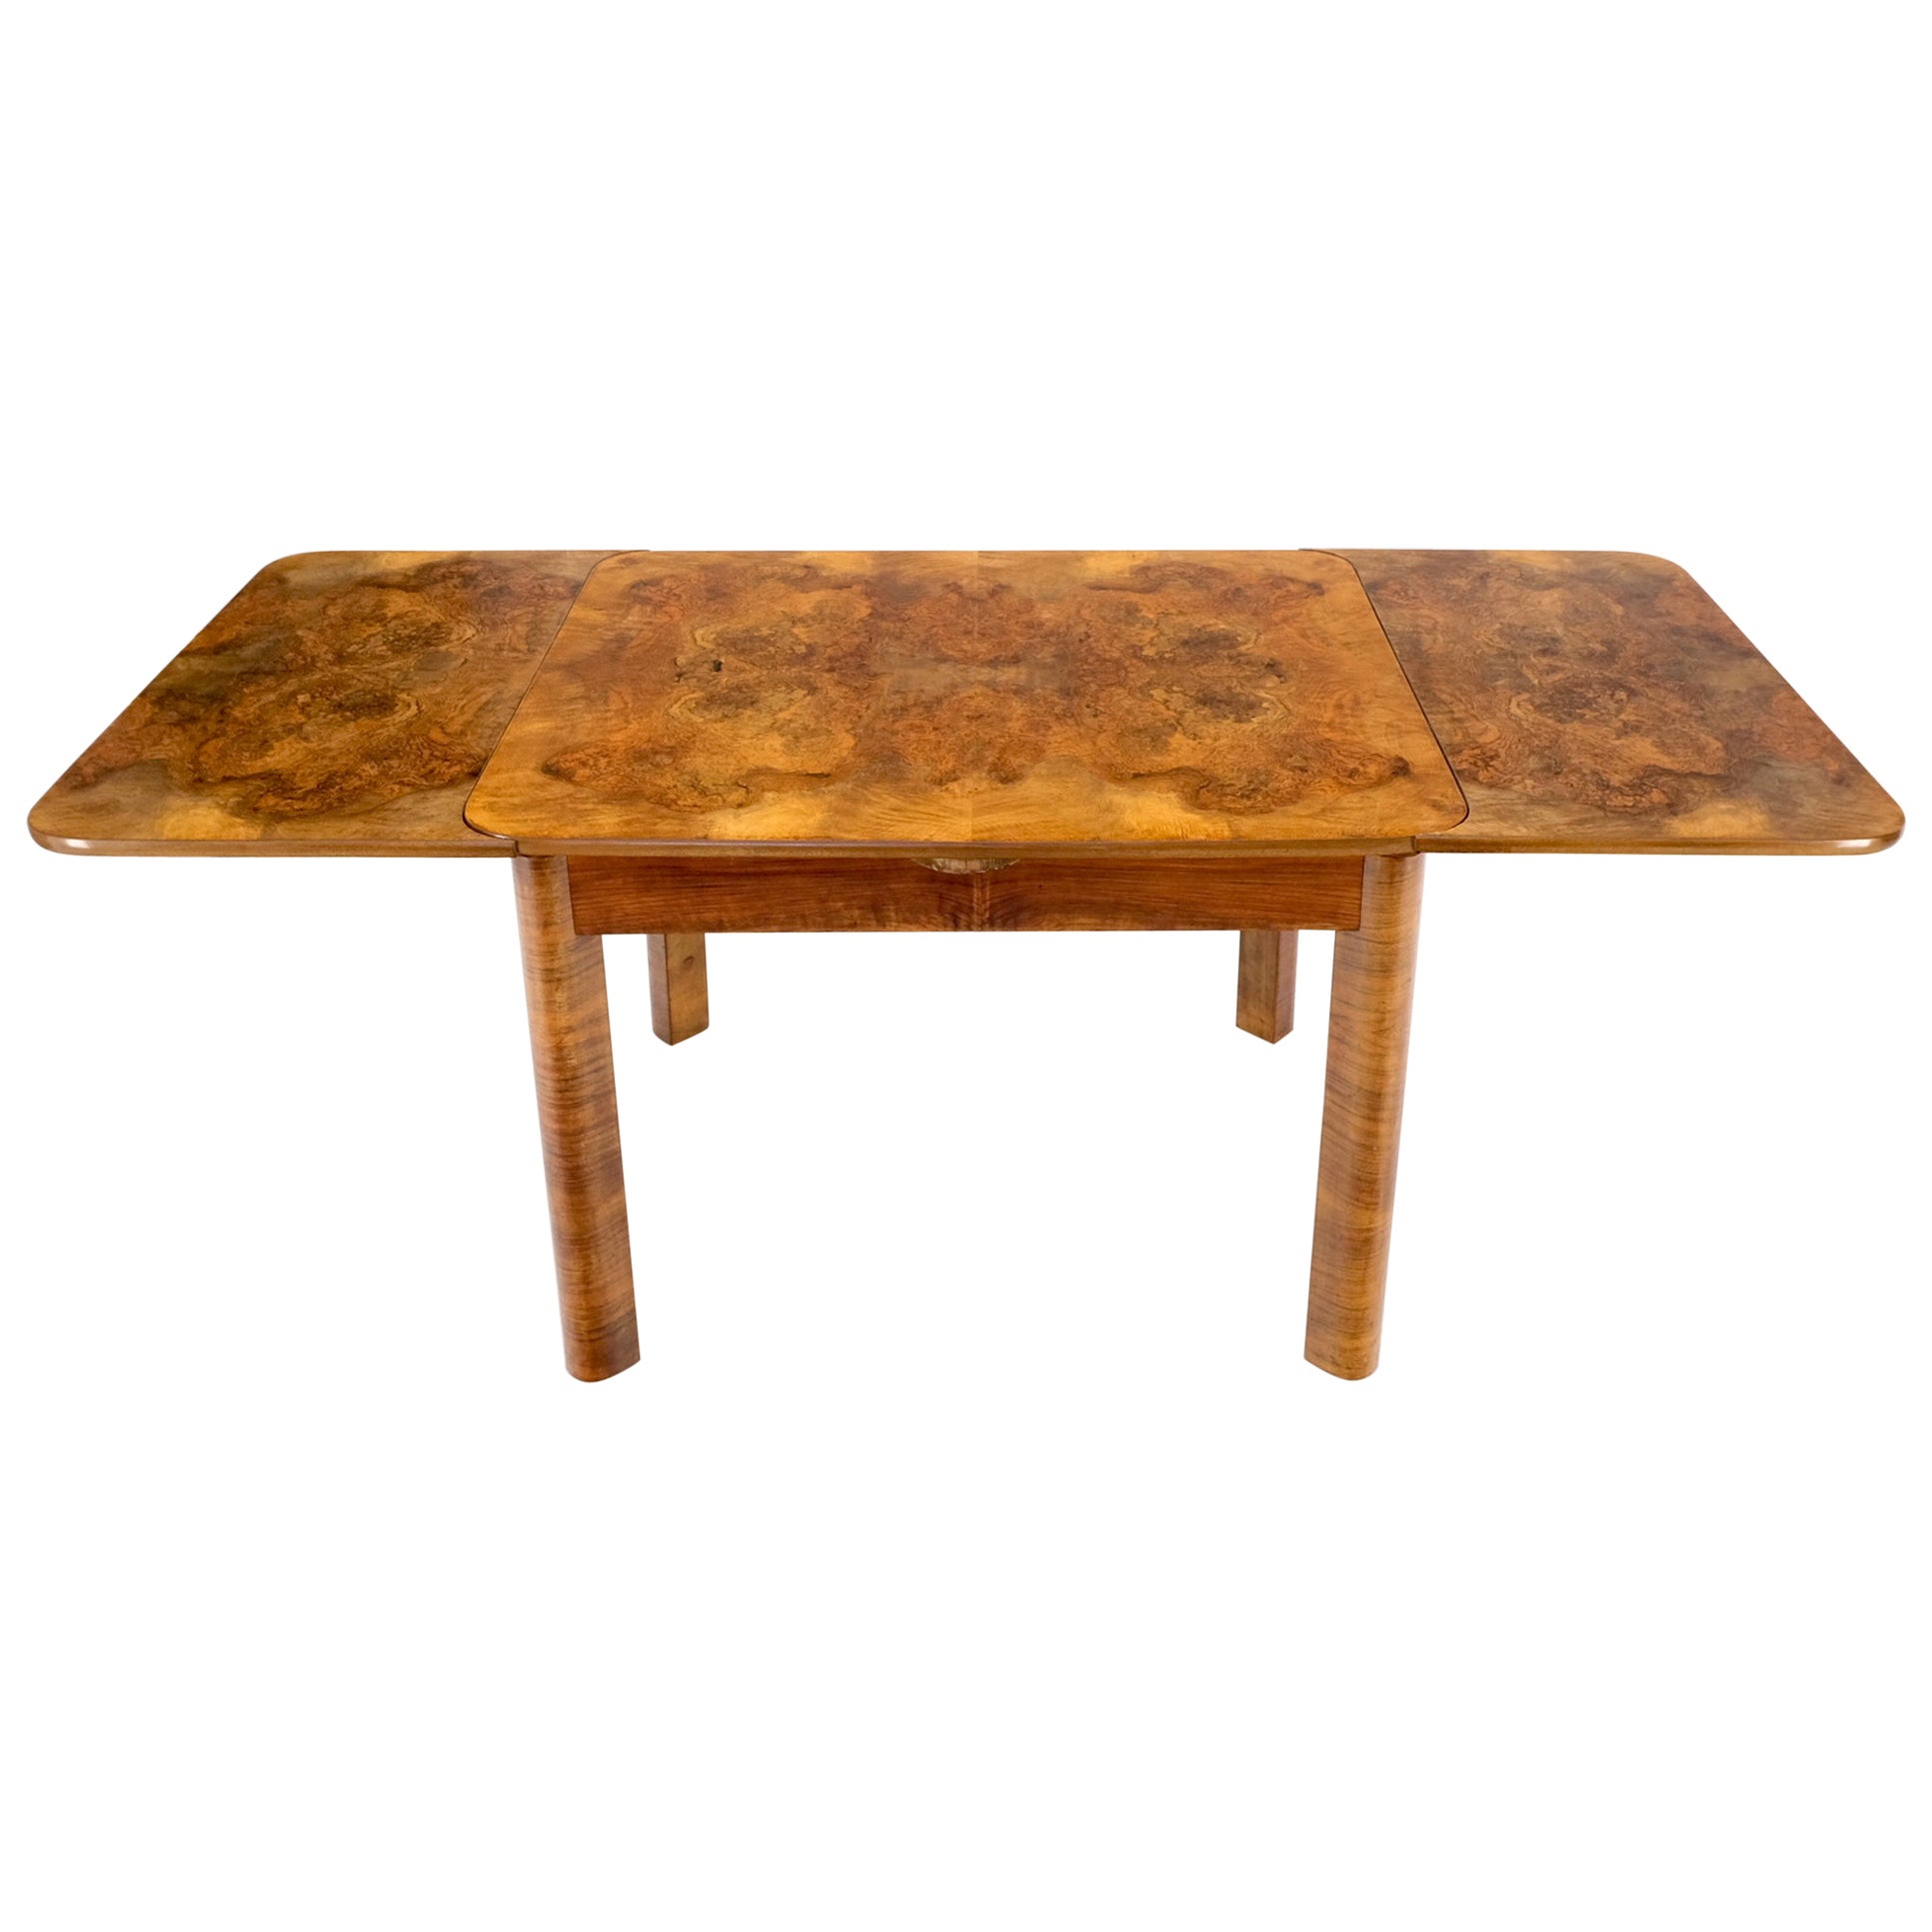 Swedish Mid-Century Modern Burl Wood Refectory Extending Dining Dinette Table For Sale